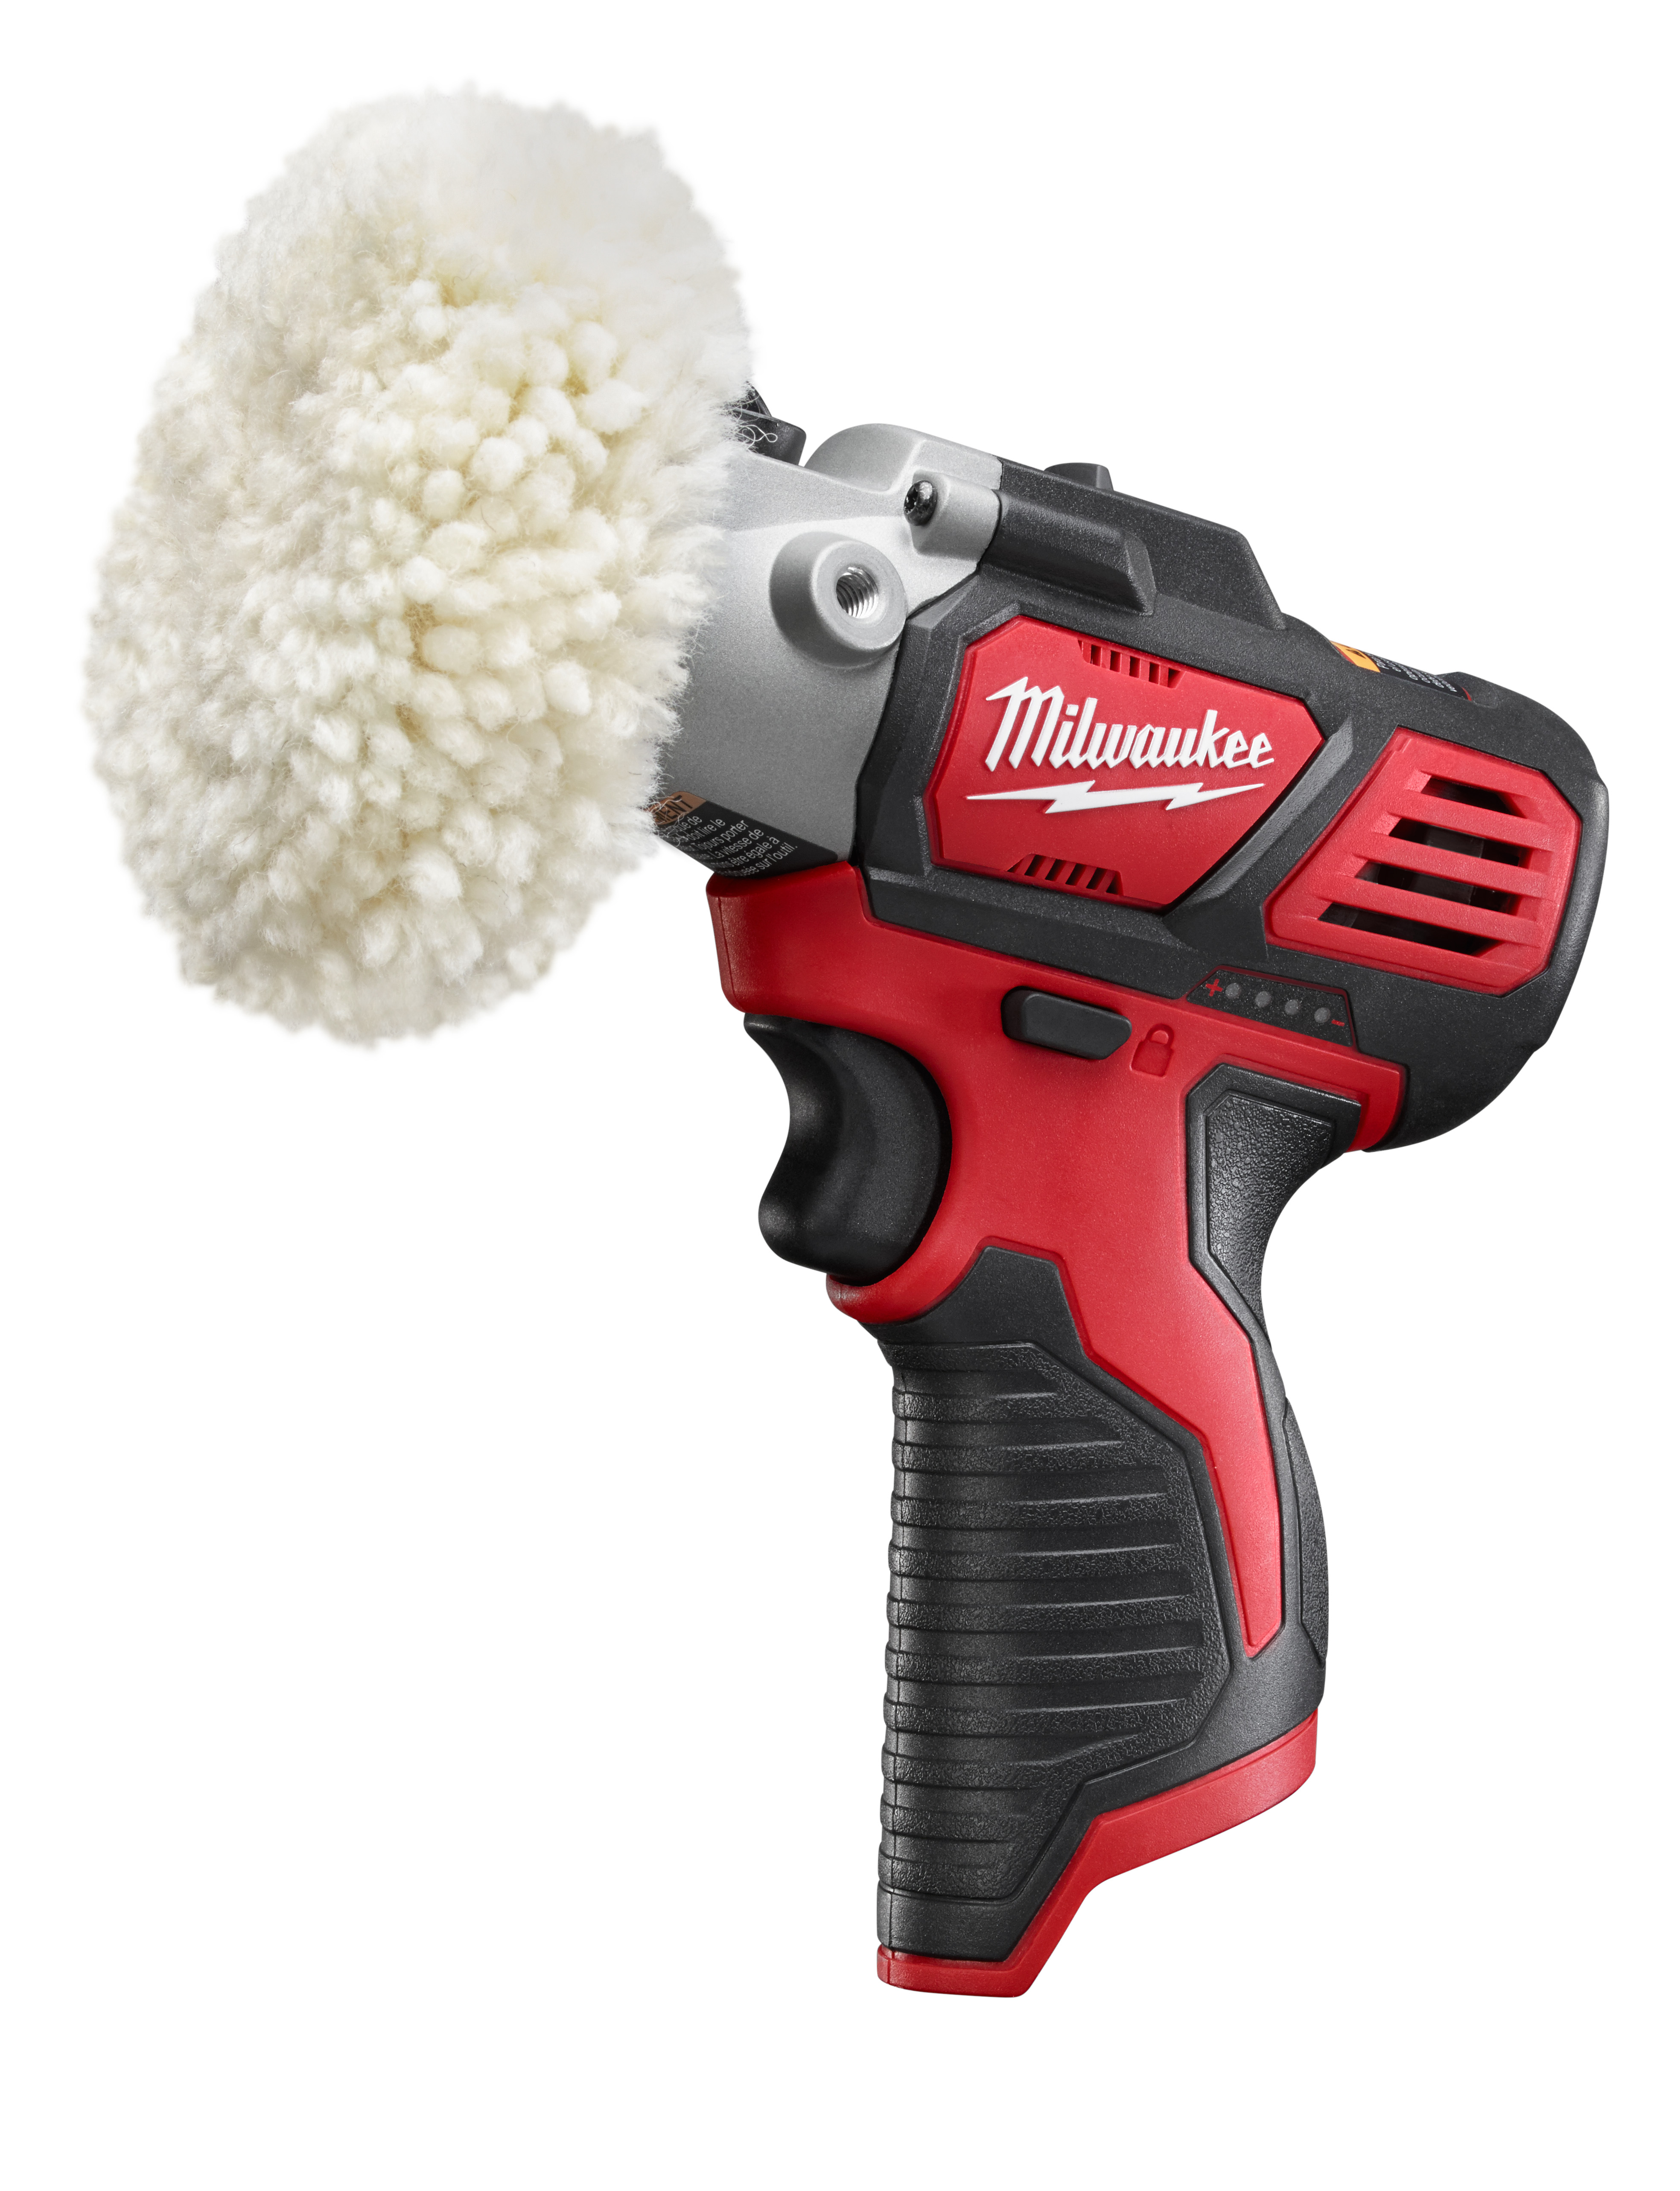 Milwaukee Tool continues to expand its 12 Volt lithium-ion system with the introduction of the new M12 variable speed polisher/sander. Optimized to provide the fastest and most precise detail work, the new tool performs the work of two tools in one by easily switching between polishing and sanding modes. As the most compact cordless polisher on the market, the M12 polisher/sander is the perfect complement to a full size polisher for a faster finish. Featuring dual mode control and a variable speed trigger, the M12 polisher/sander delivers increased user control, regardless of the application. A tool-free accessory change allows the user to quickly change between polishing and sanding accessories.